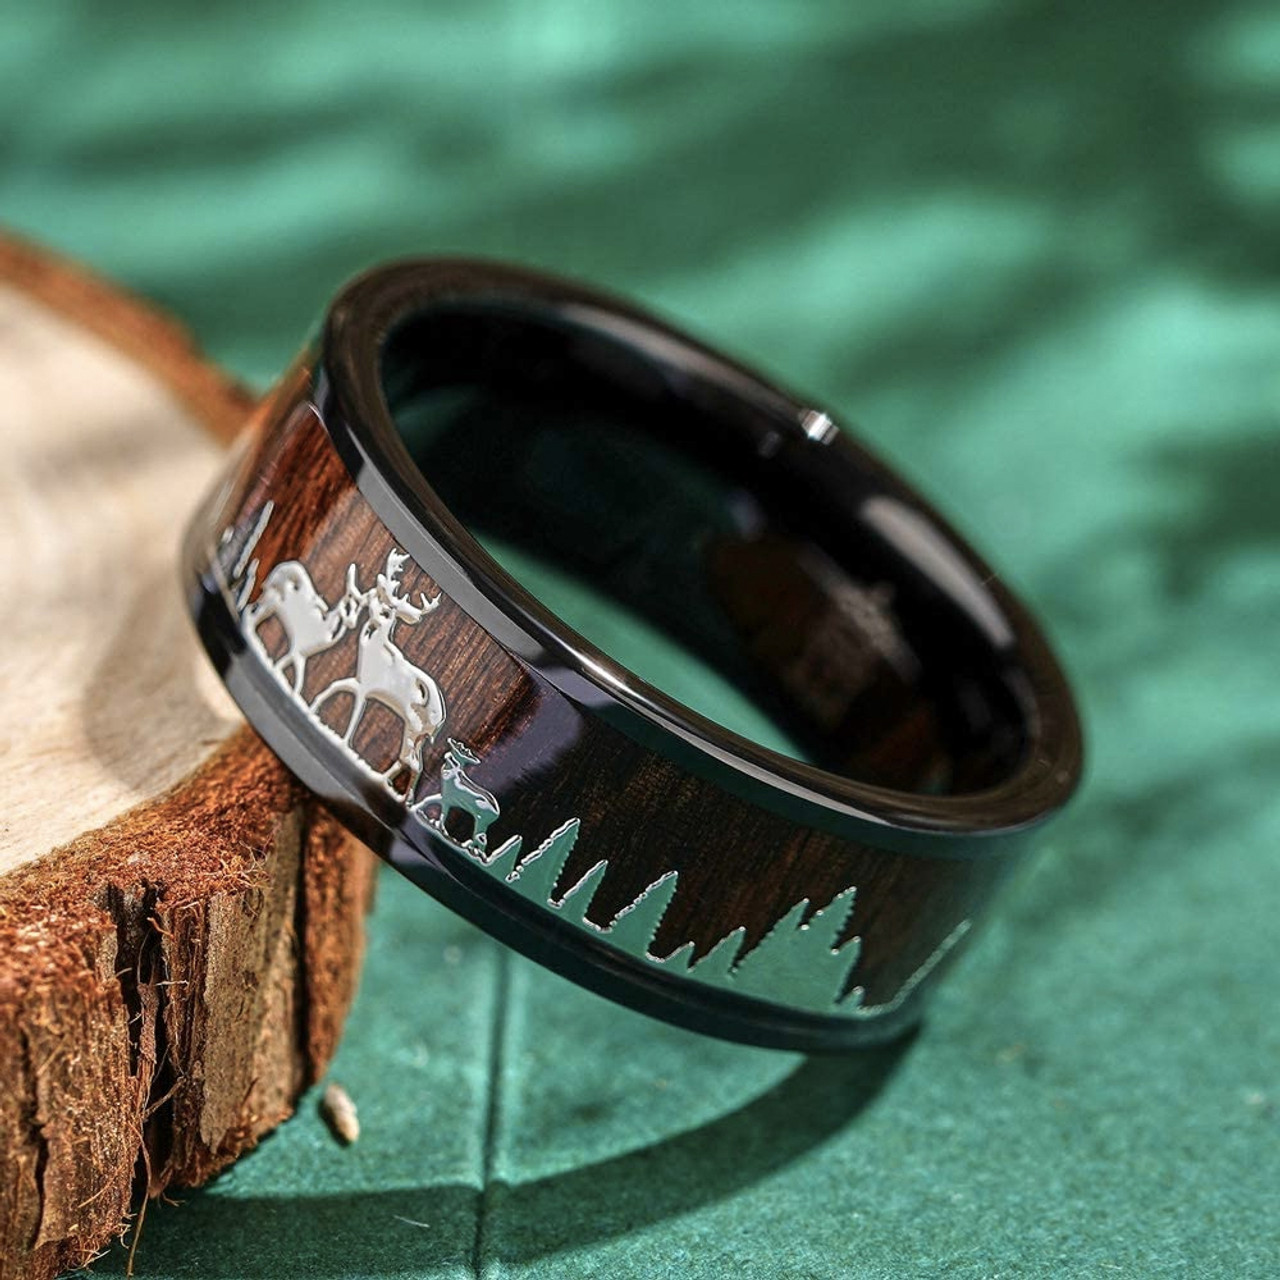 (8mm)  Unisex or Men's Hunting Ring / Deer Crossing Wedding ring band. Black Tungsten Carbide Band with Deer Silhouette over Real Koa Wood. Hunter's Wedding ring band Comfort Fit Ring